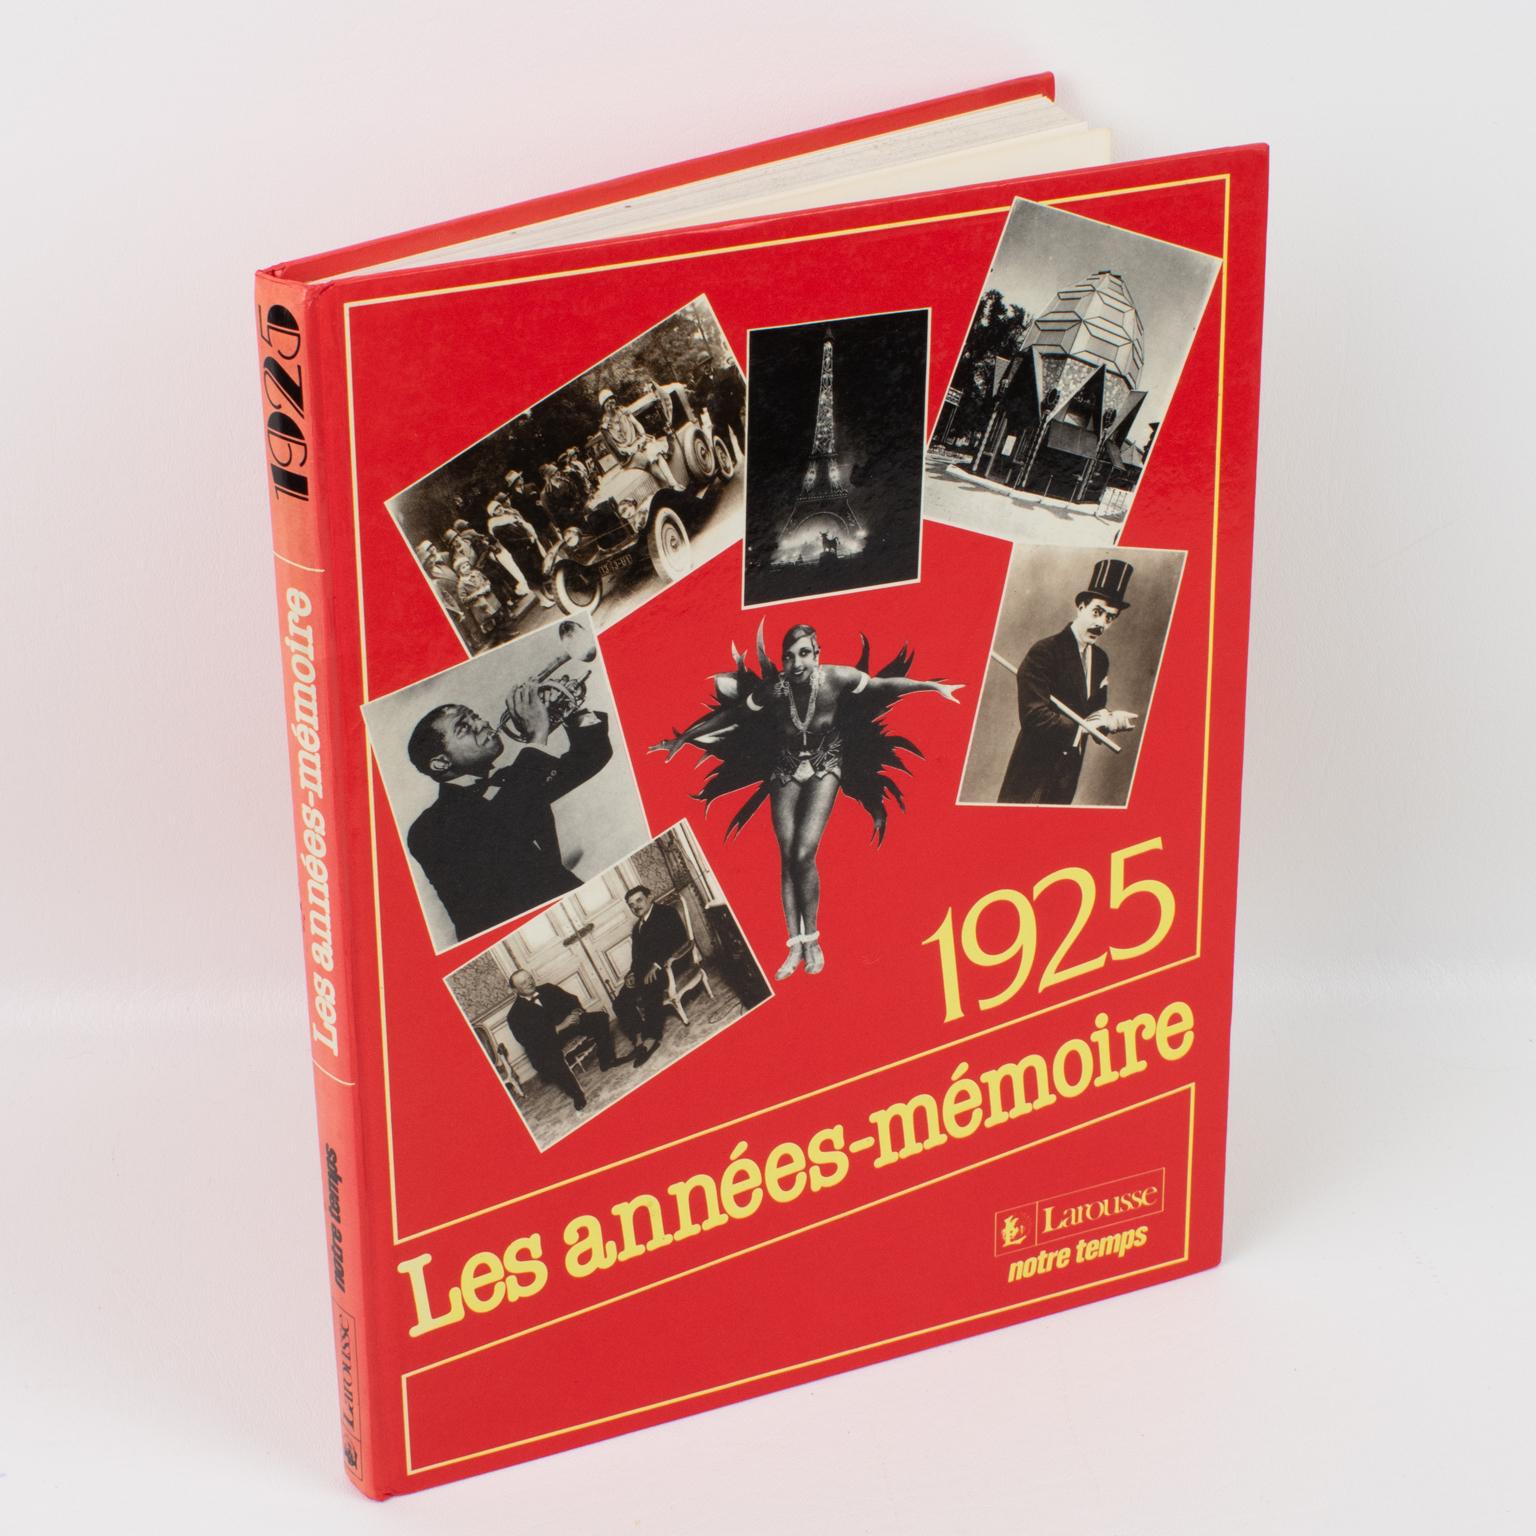 1925, Les Années-Mémoire (1925, The Memory Years), French book by Editions Larousse, 1988.
Relive the year 1925 as if you were there. This volume will make you relive, with emotion, the facts and events of the interwar period. Because that year, in